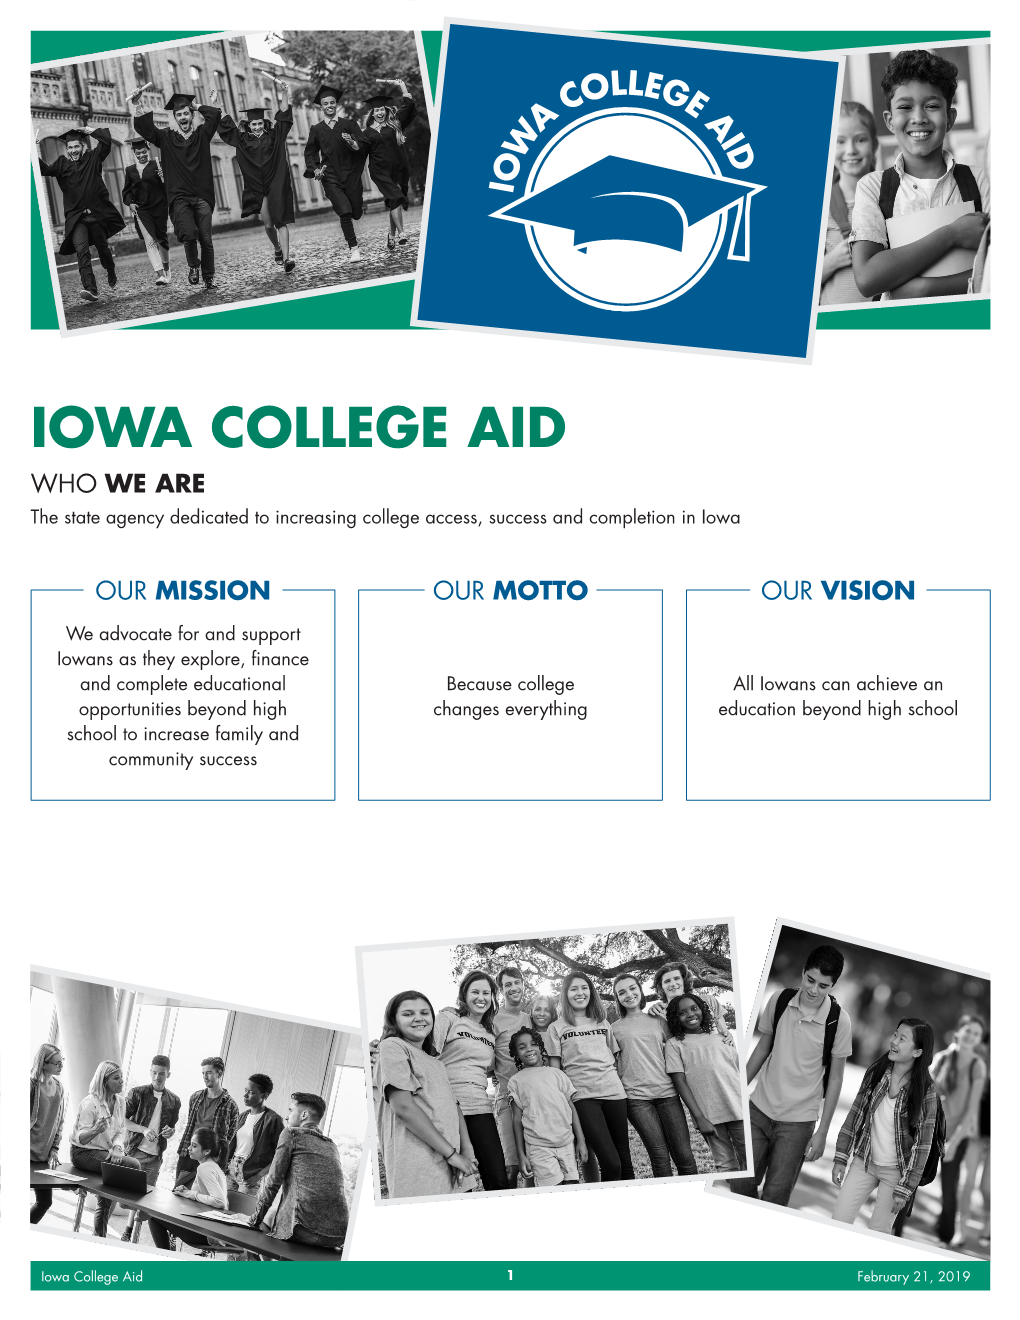 IOWA COLLEGE AID WHO WE ARE the State Agency Dedicated to Increasing College Access, Success and Completion in Iowa